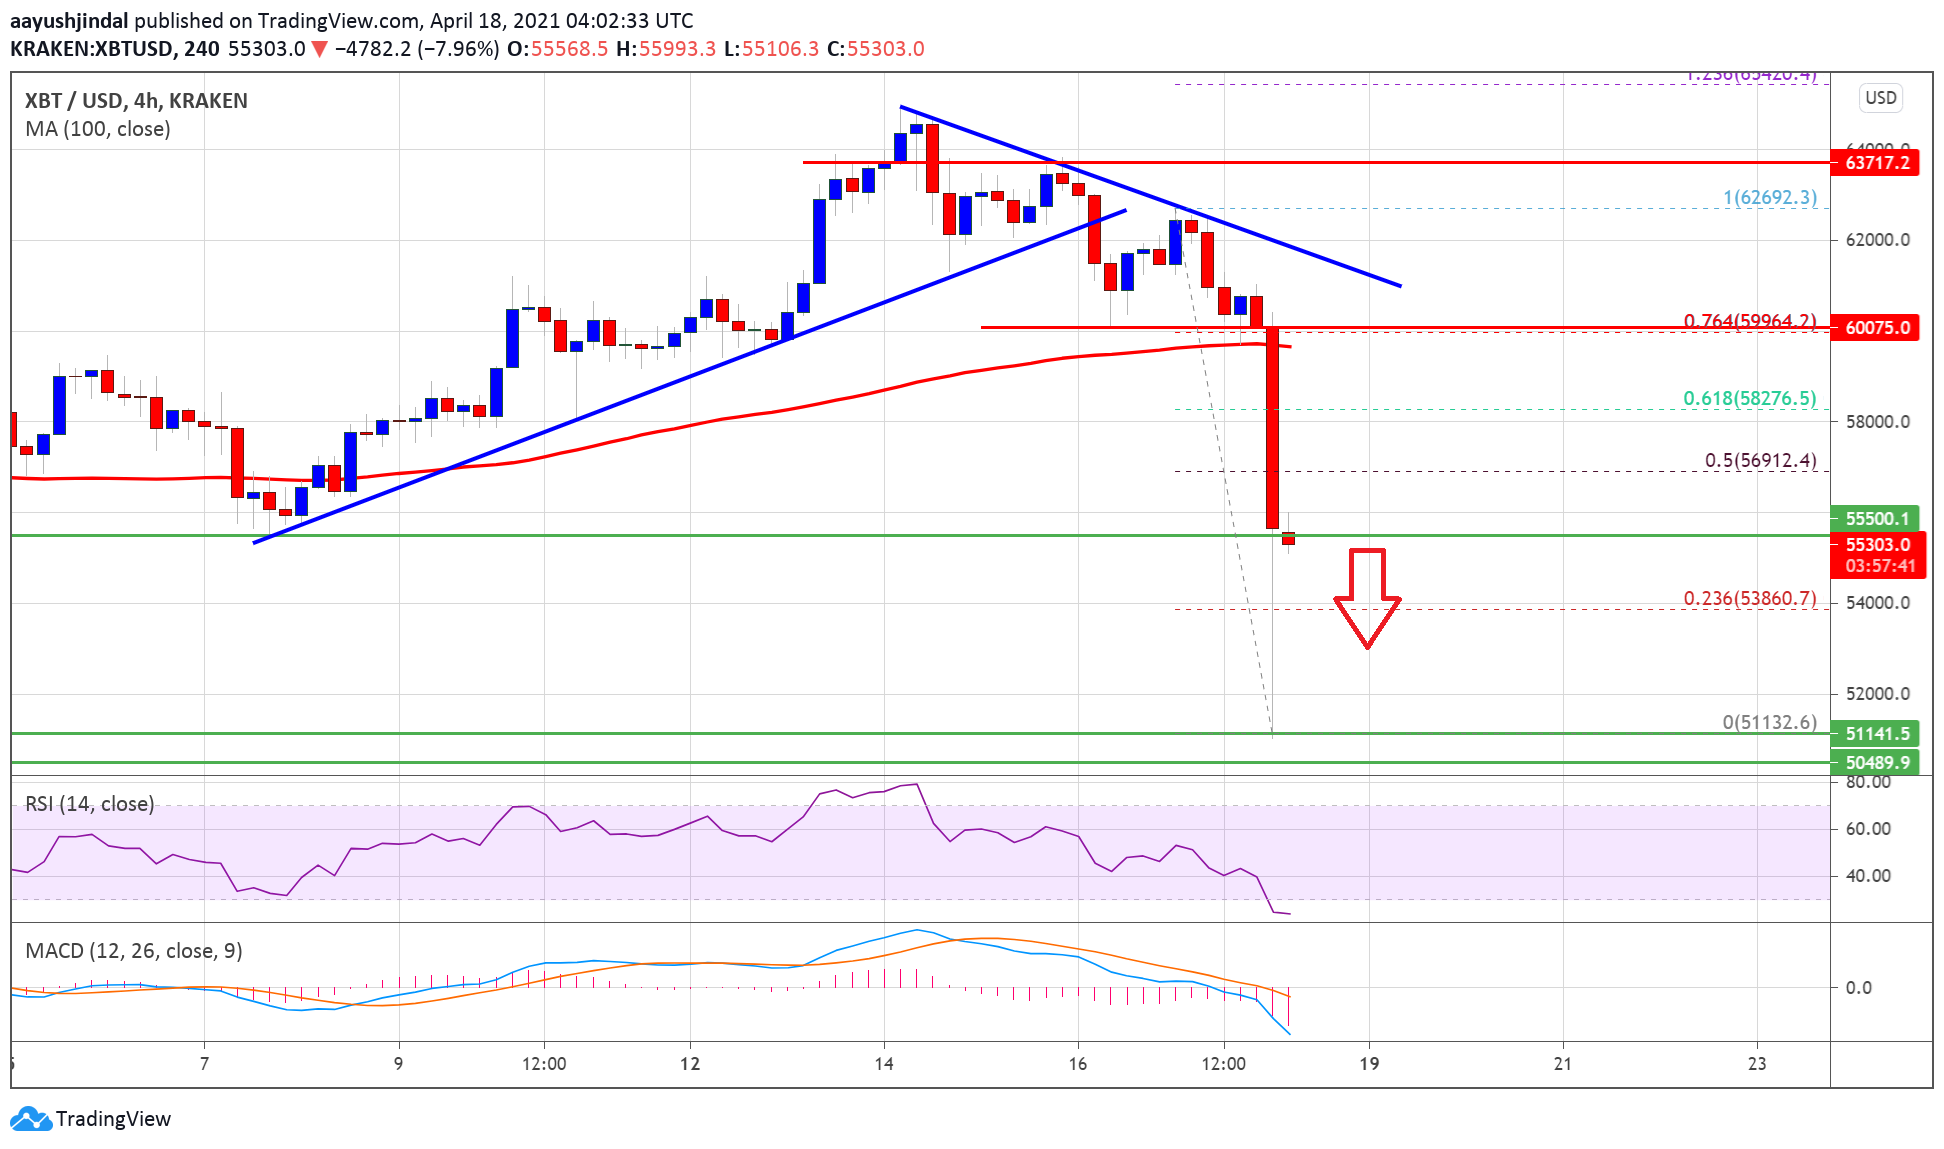 Bitcoin Price Nosedives $5K, Why BTC Could Extend Losses